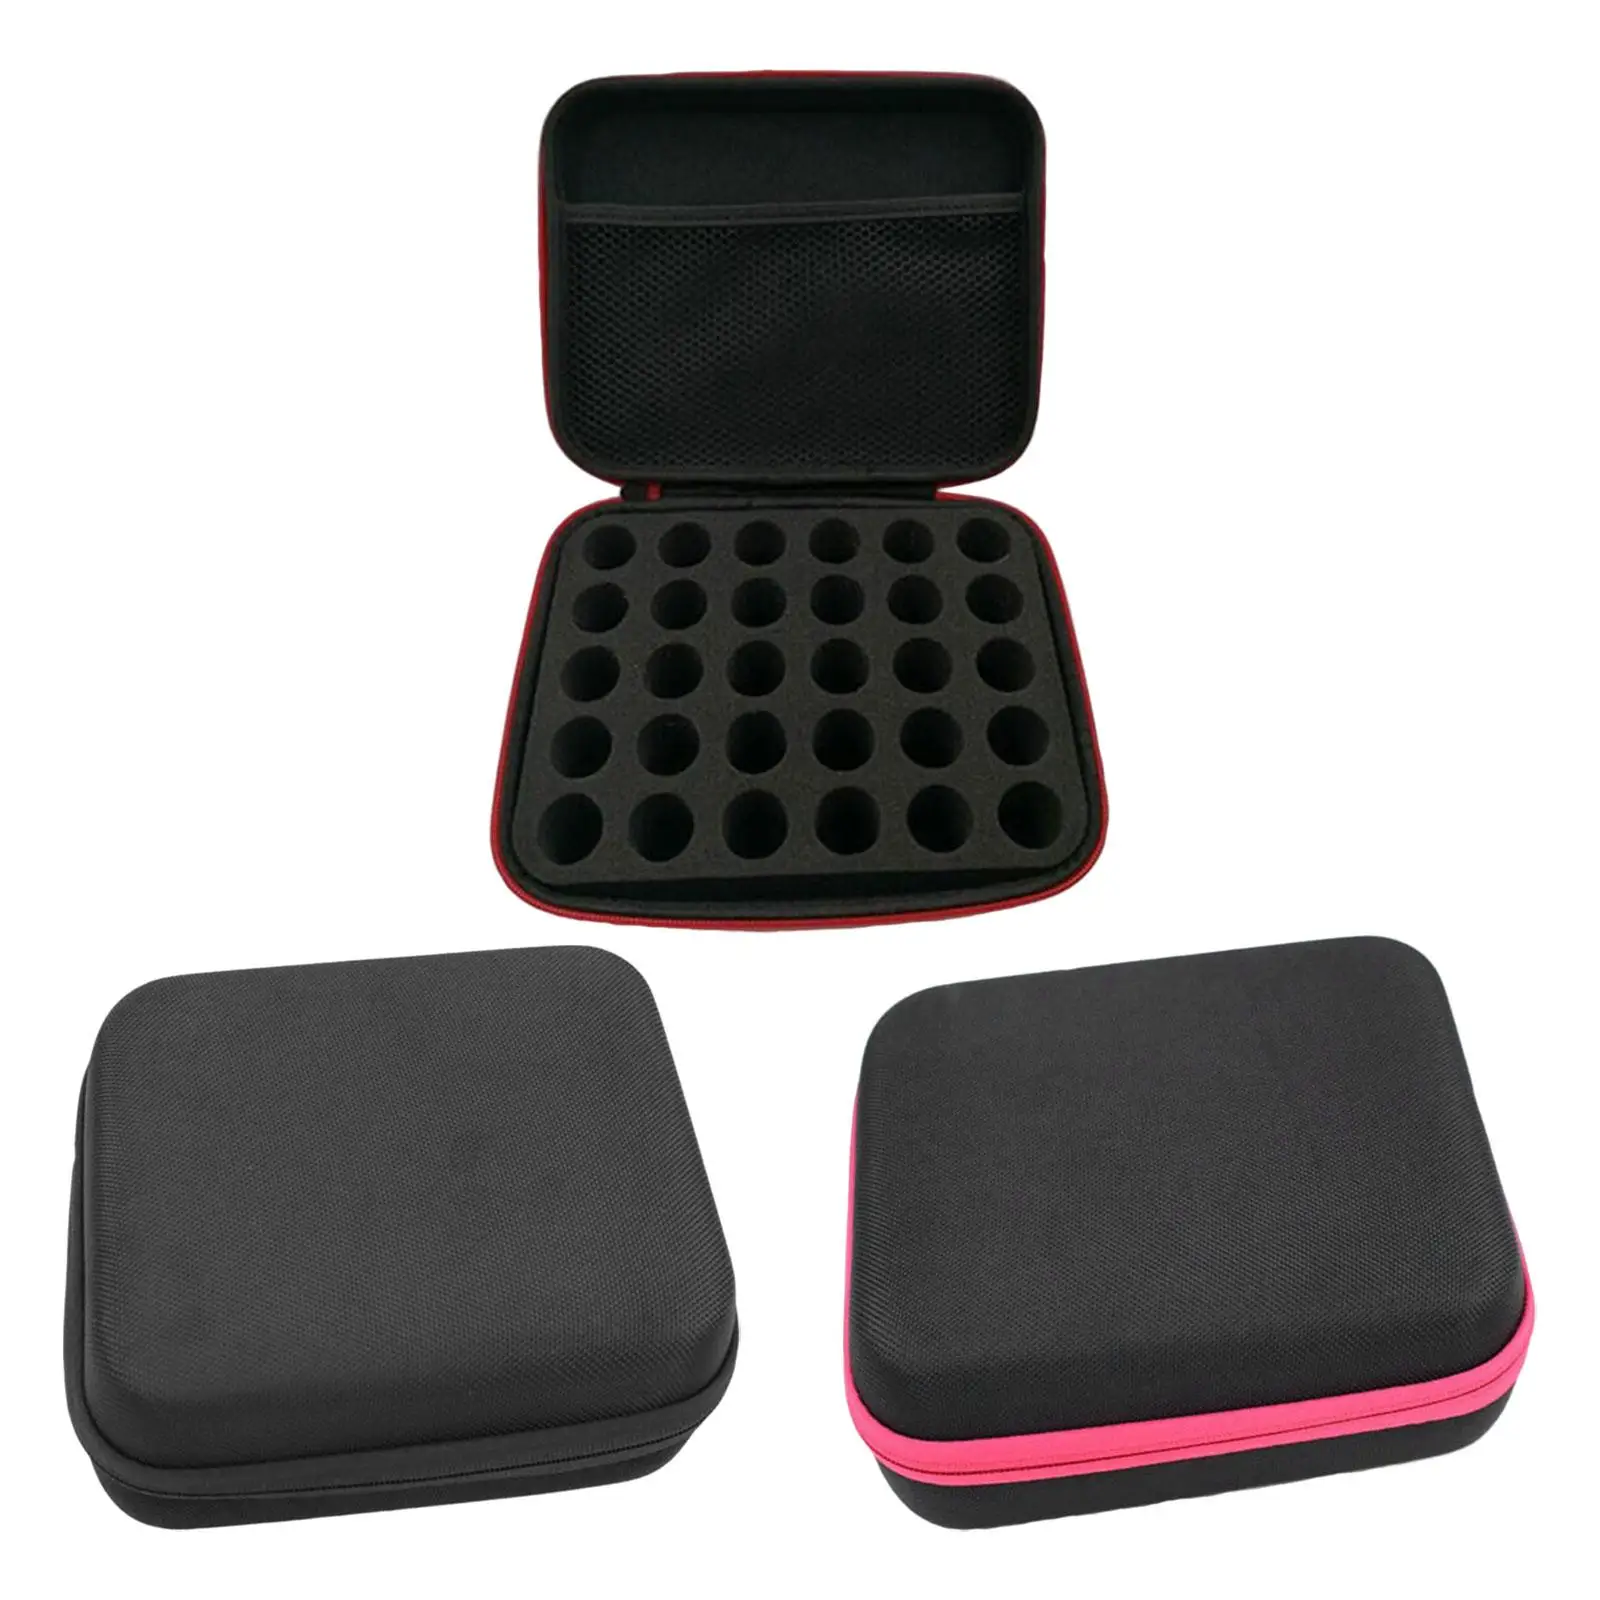 Essential Oil Carrying Case EVA Waterproof Durable Nail Polish Storage Bag for Travel